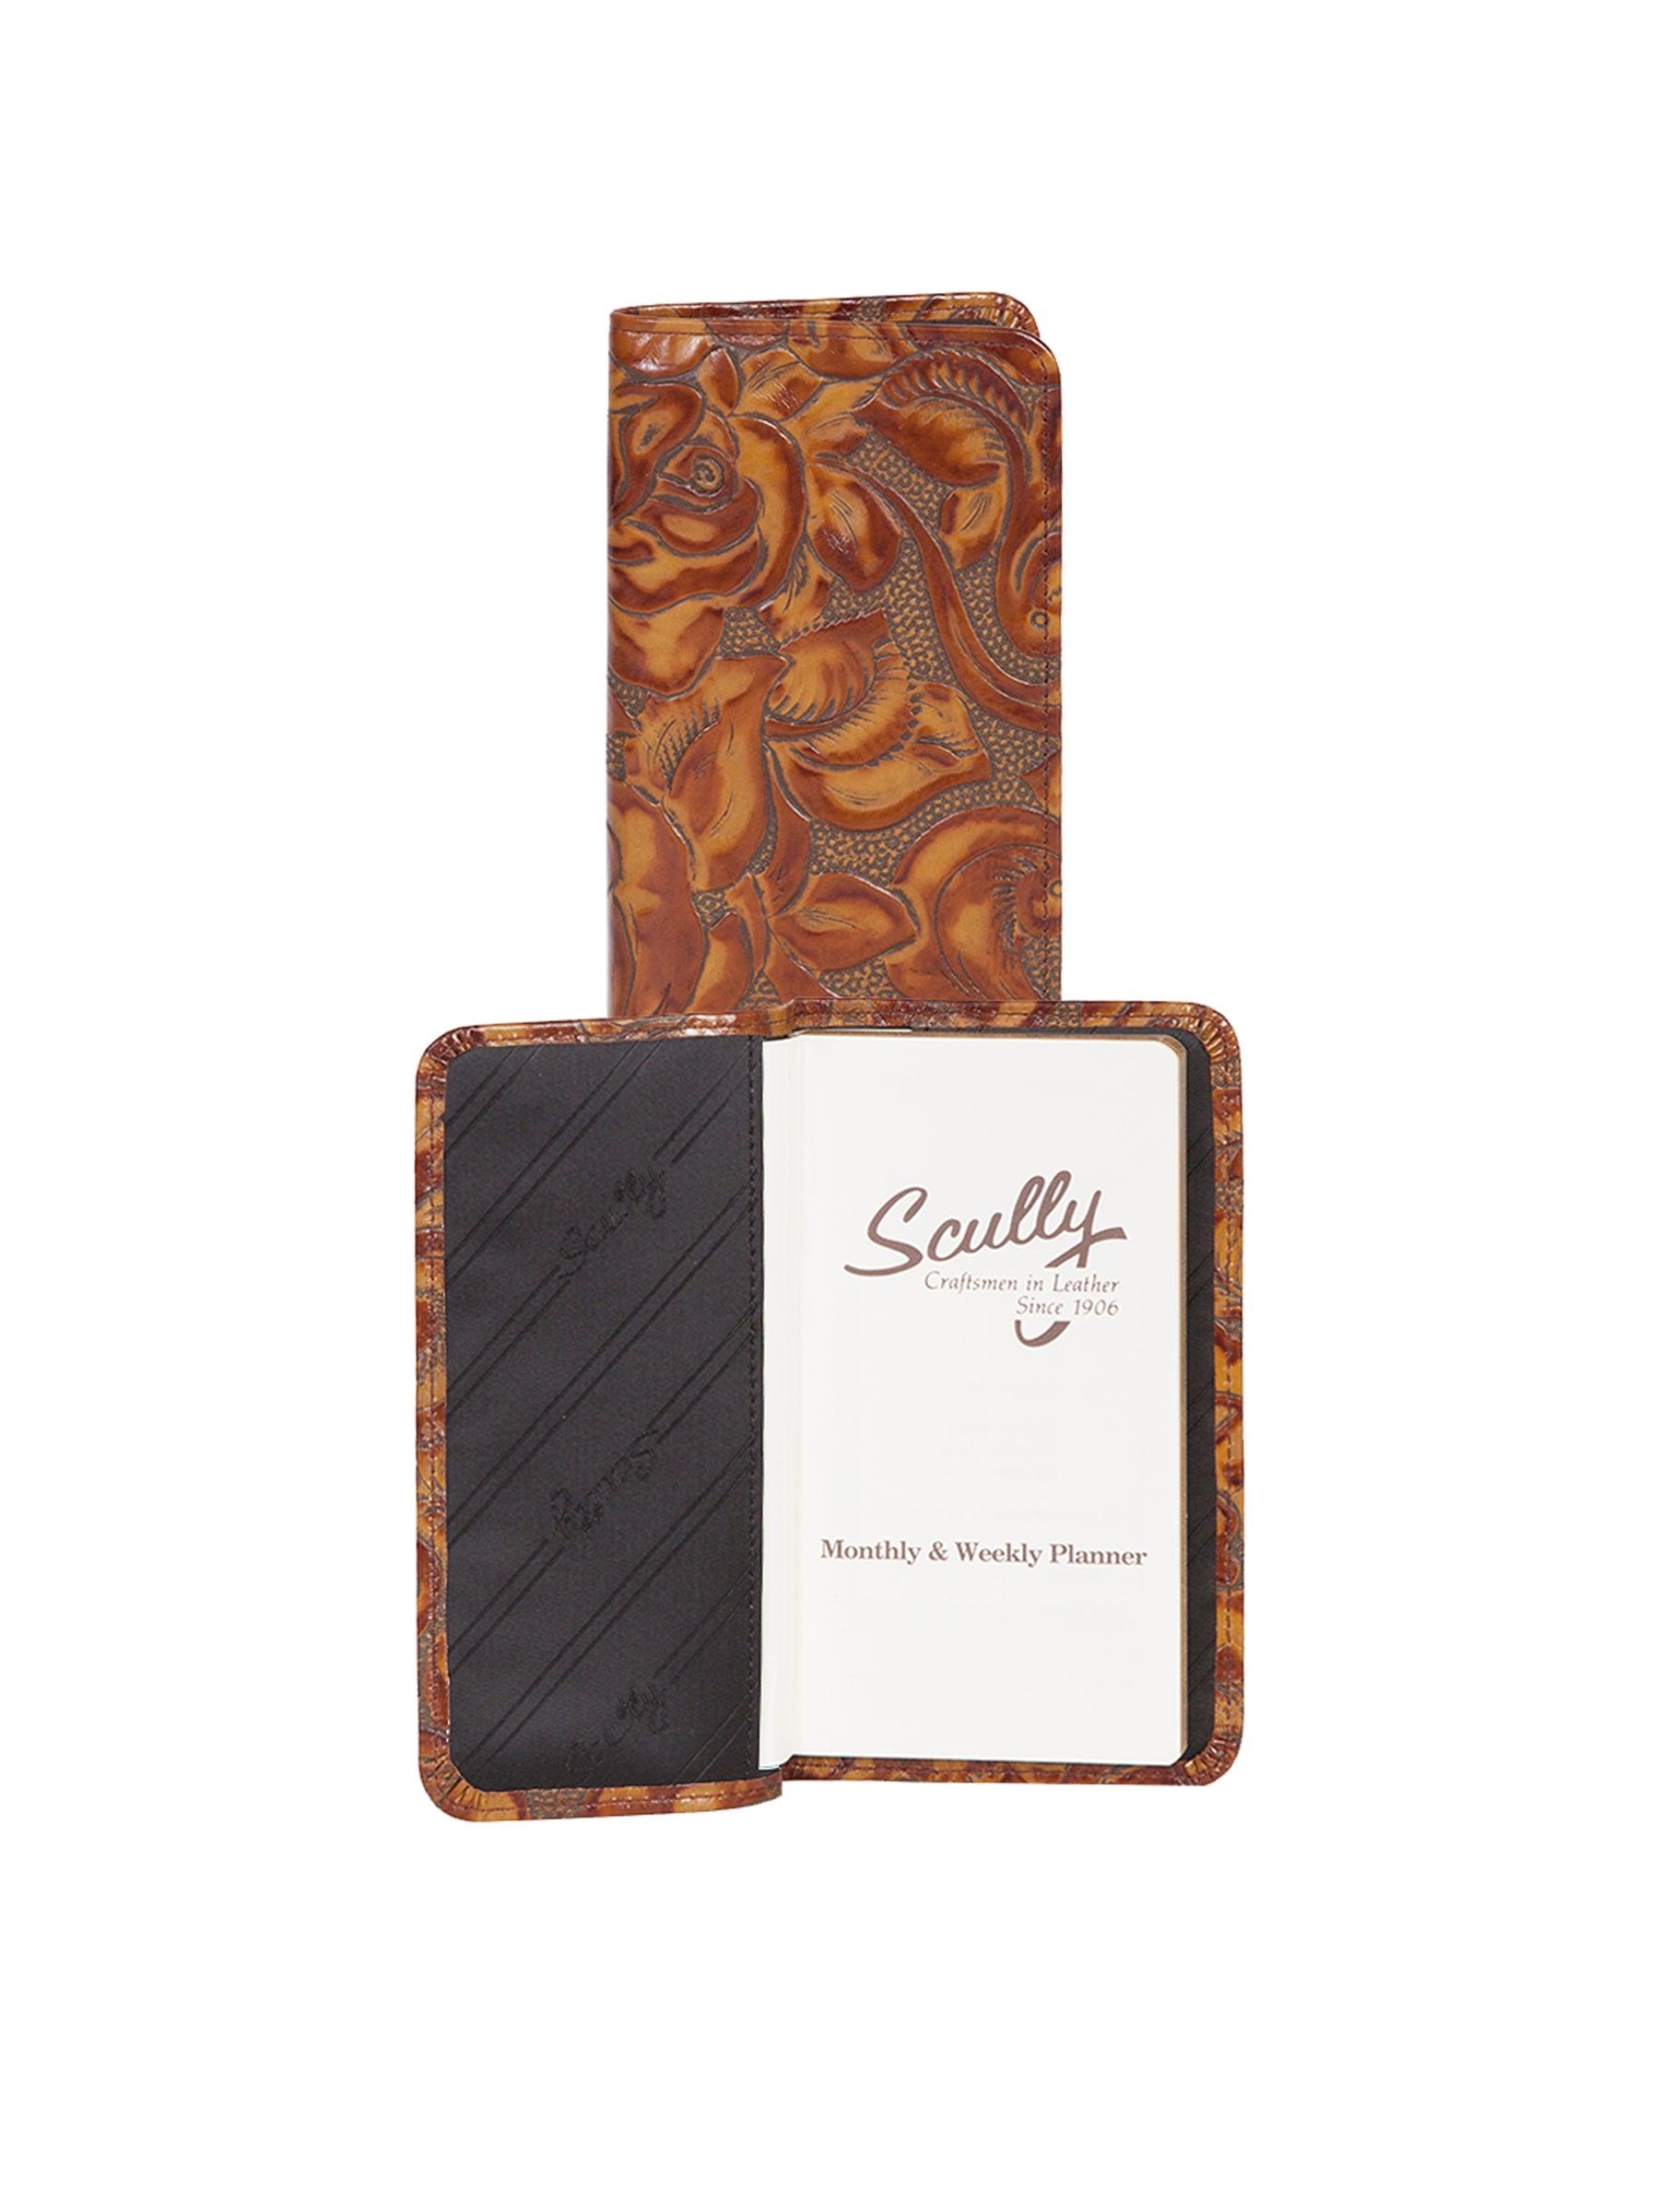 Scully Leather Chocolate New Tooled Leather Ruled Pocket Notebook - Flyclothing LLC